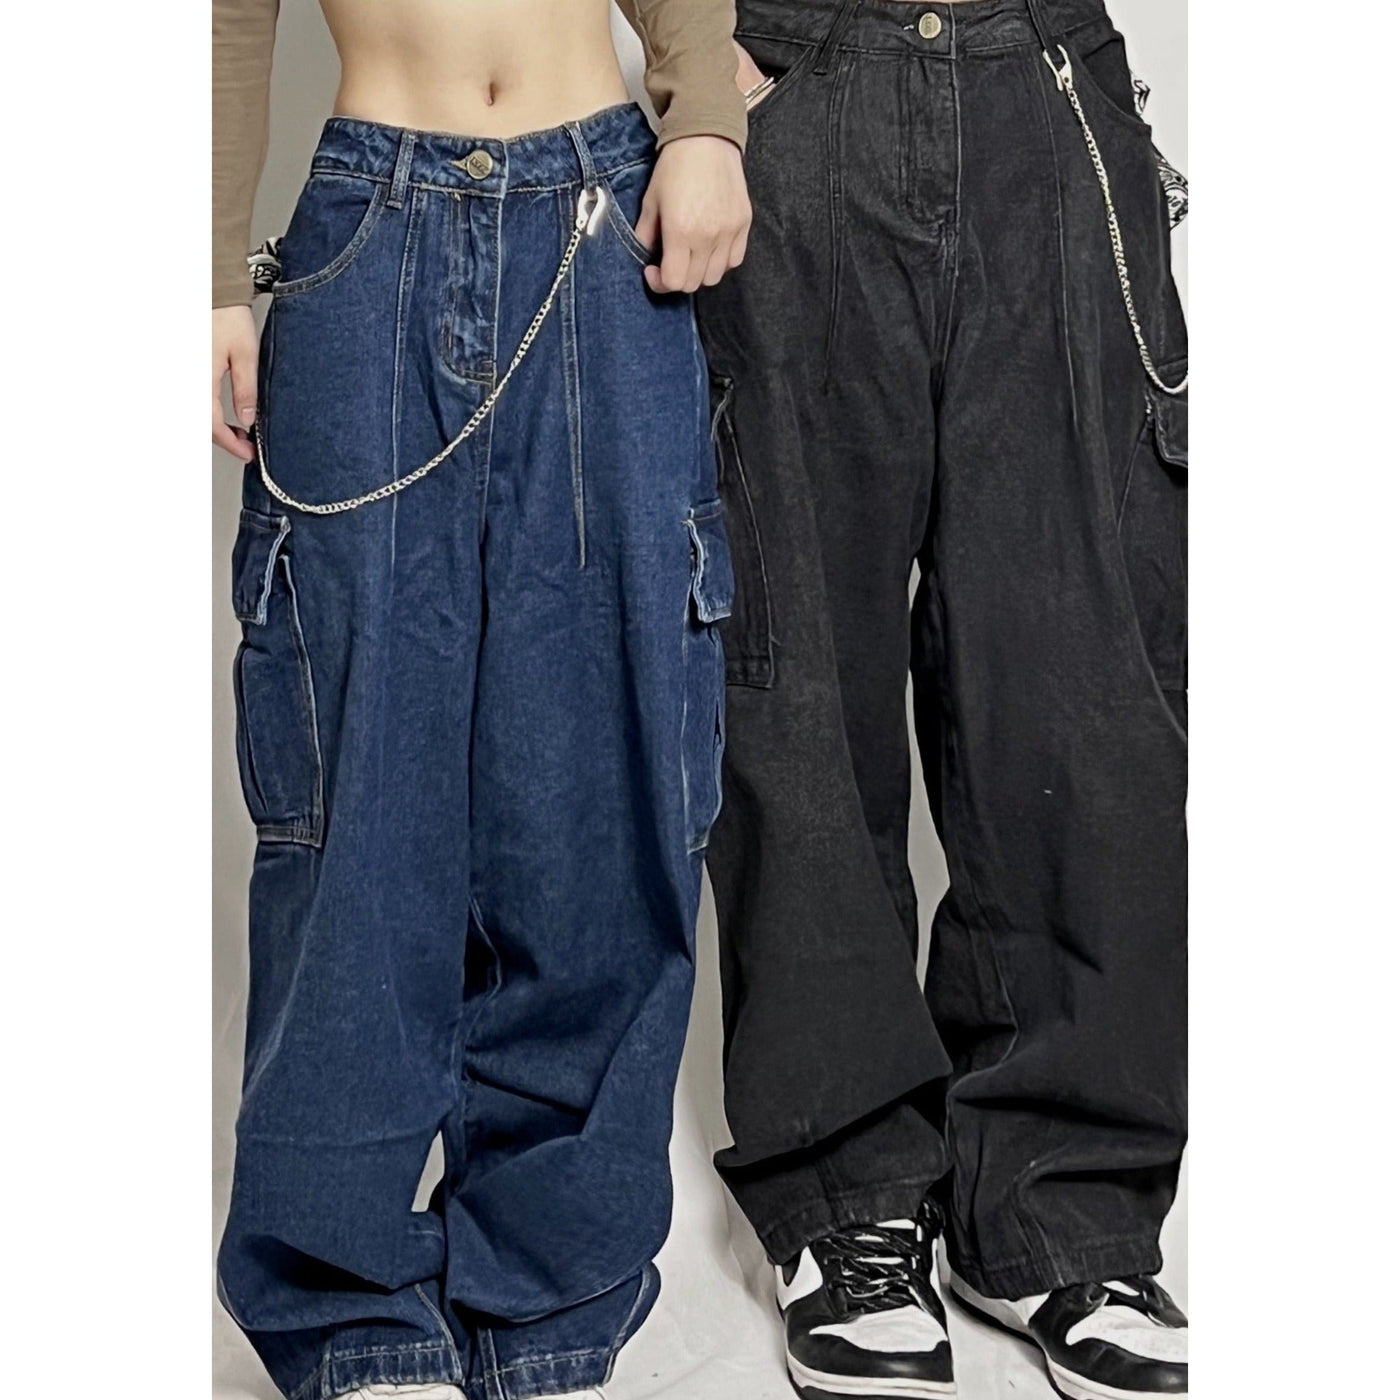 Chain Detail Cargo Pants Korean Street Fashion Pants By Made Extreme Shop Online at OH Vault